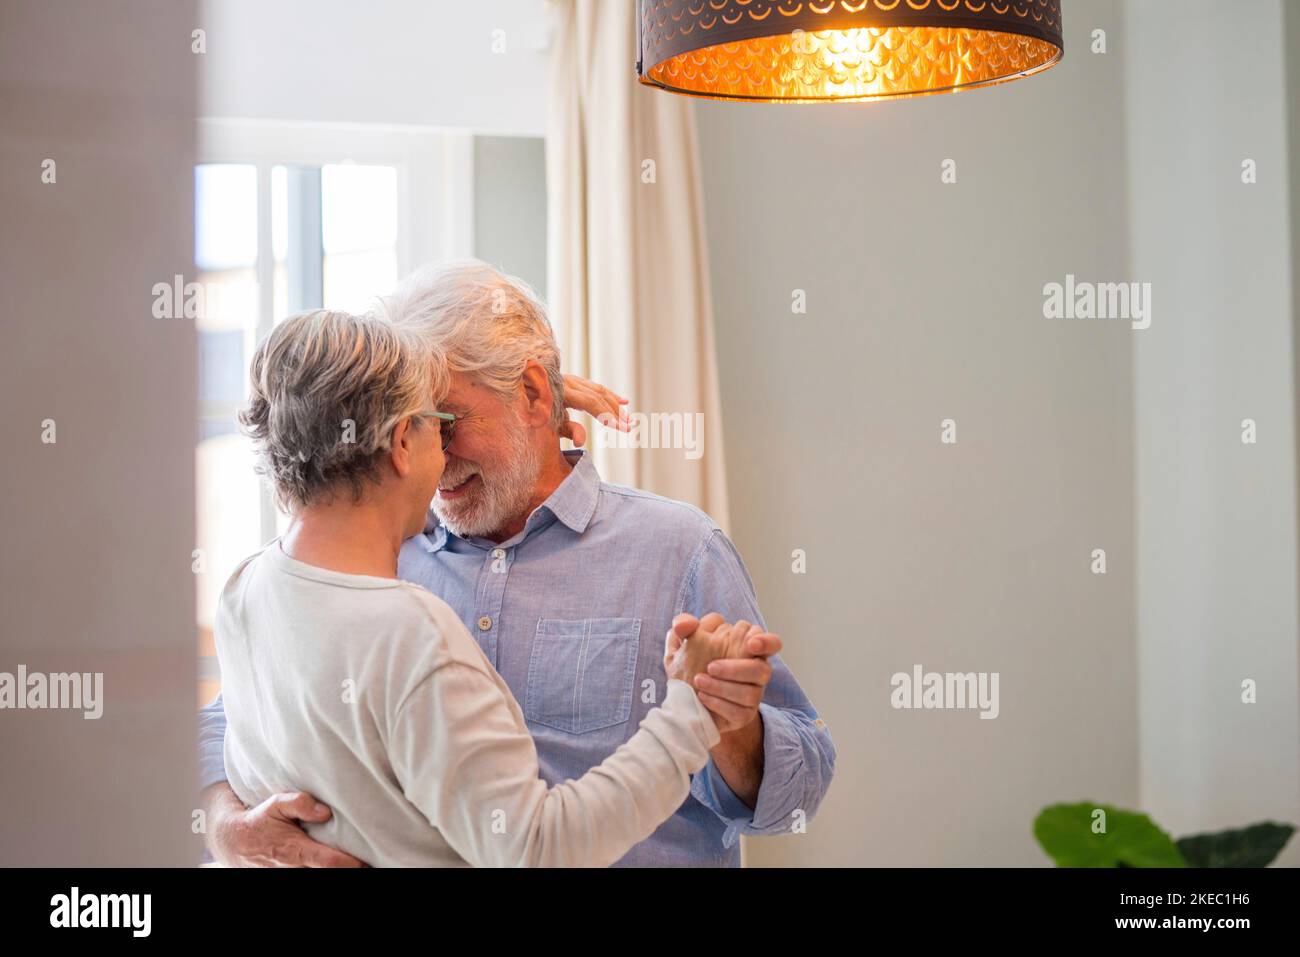 Cheerful senior couple dancing and smiling looking at each other. Elderly happy couple celebrating by dancing in living room. Romantic old aged couple holding hands and dancing together at home Stock Photo